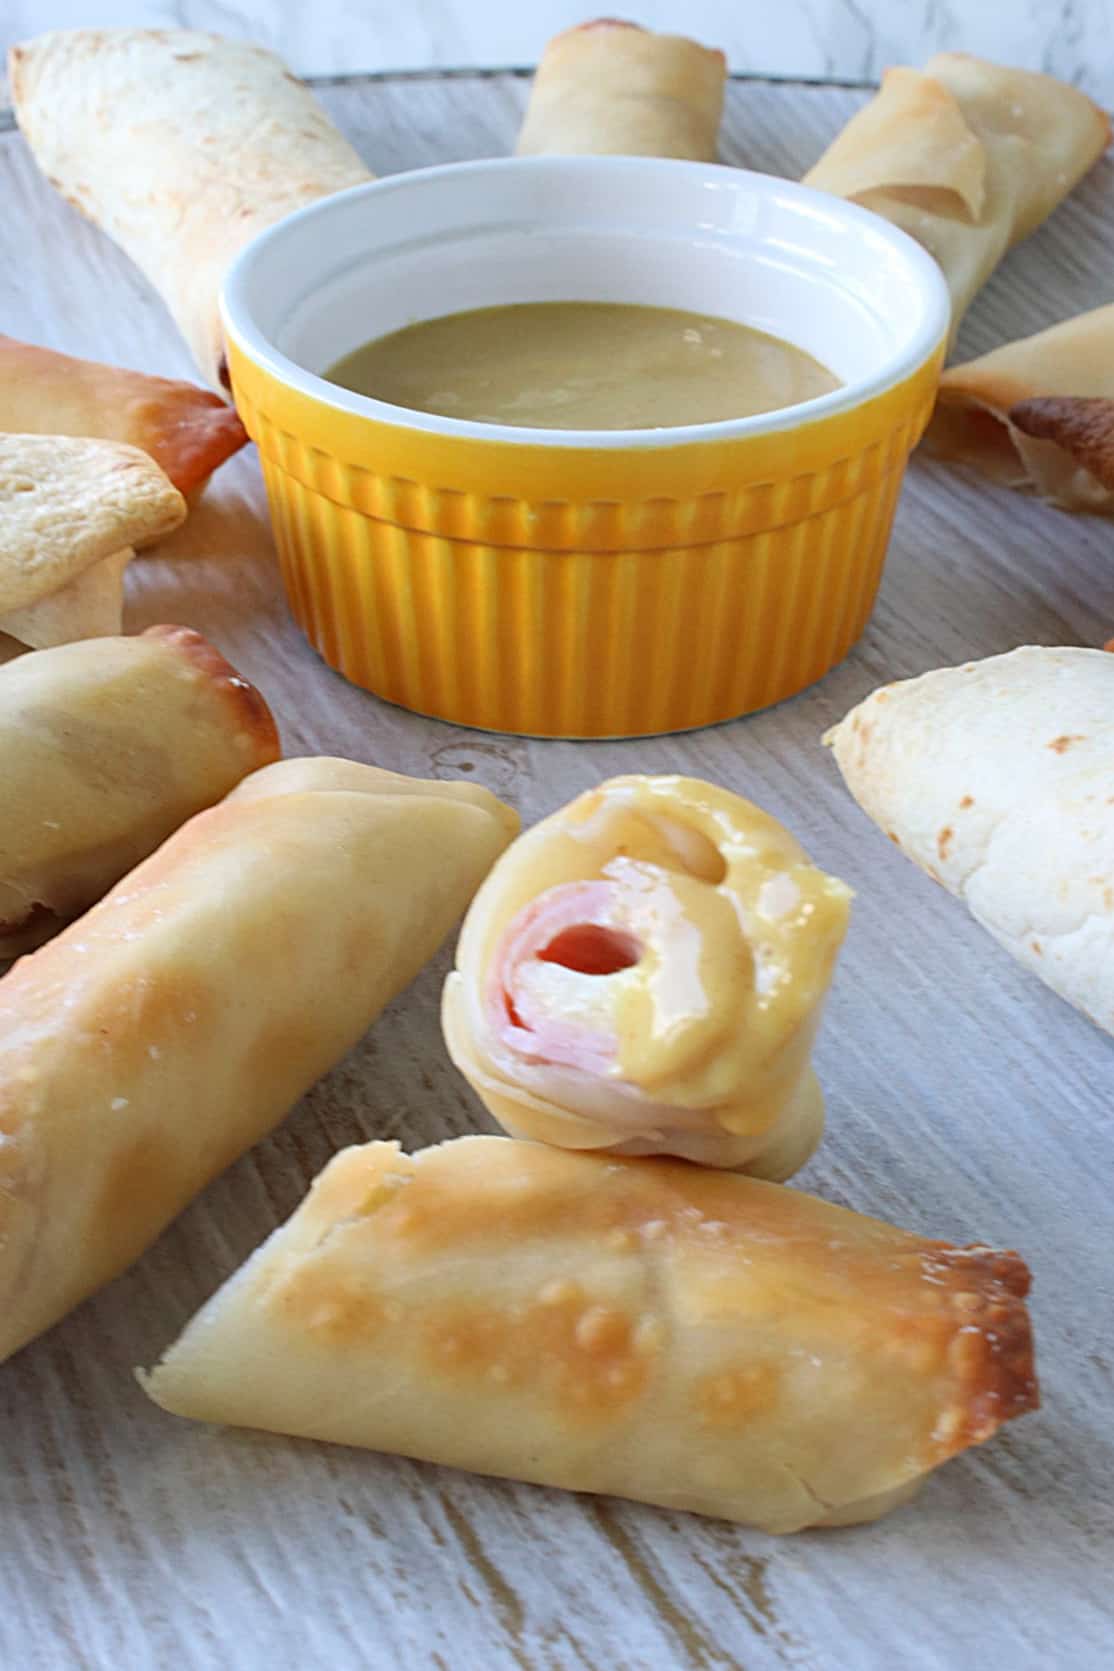 The inside of a Ham and Cheese Eggroll with dipping sauce.